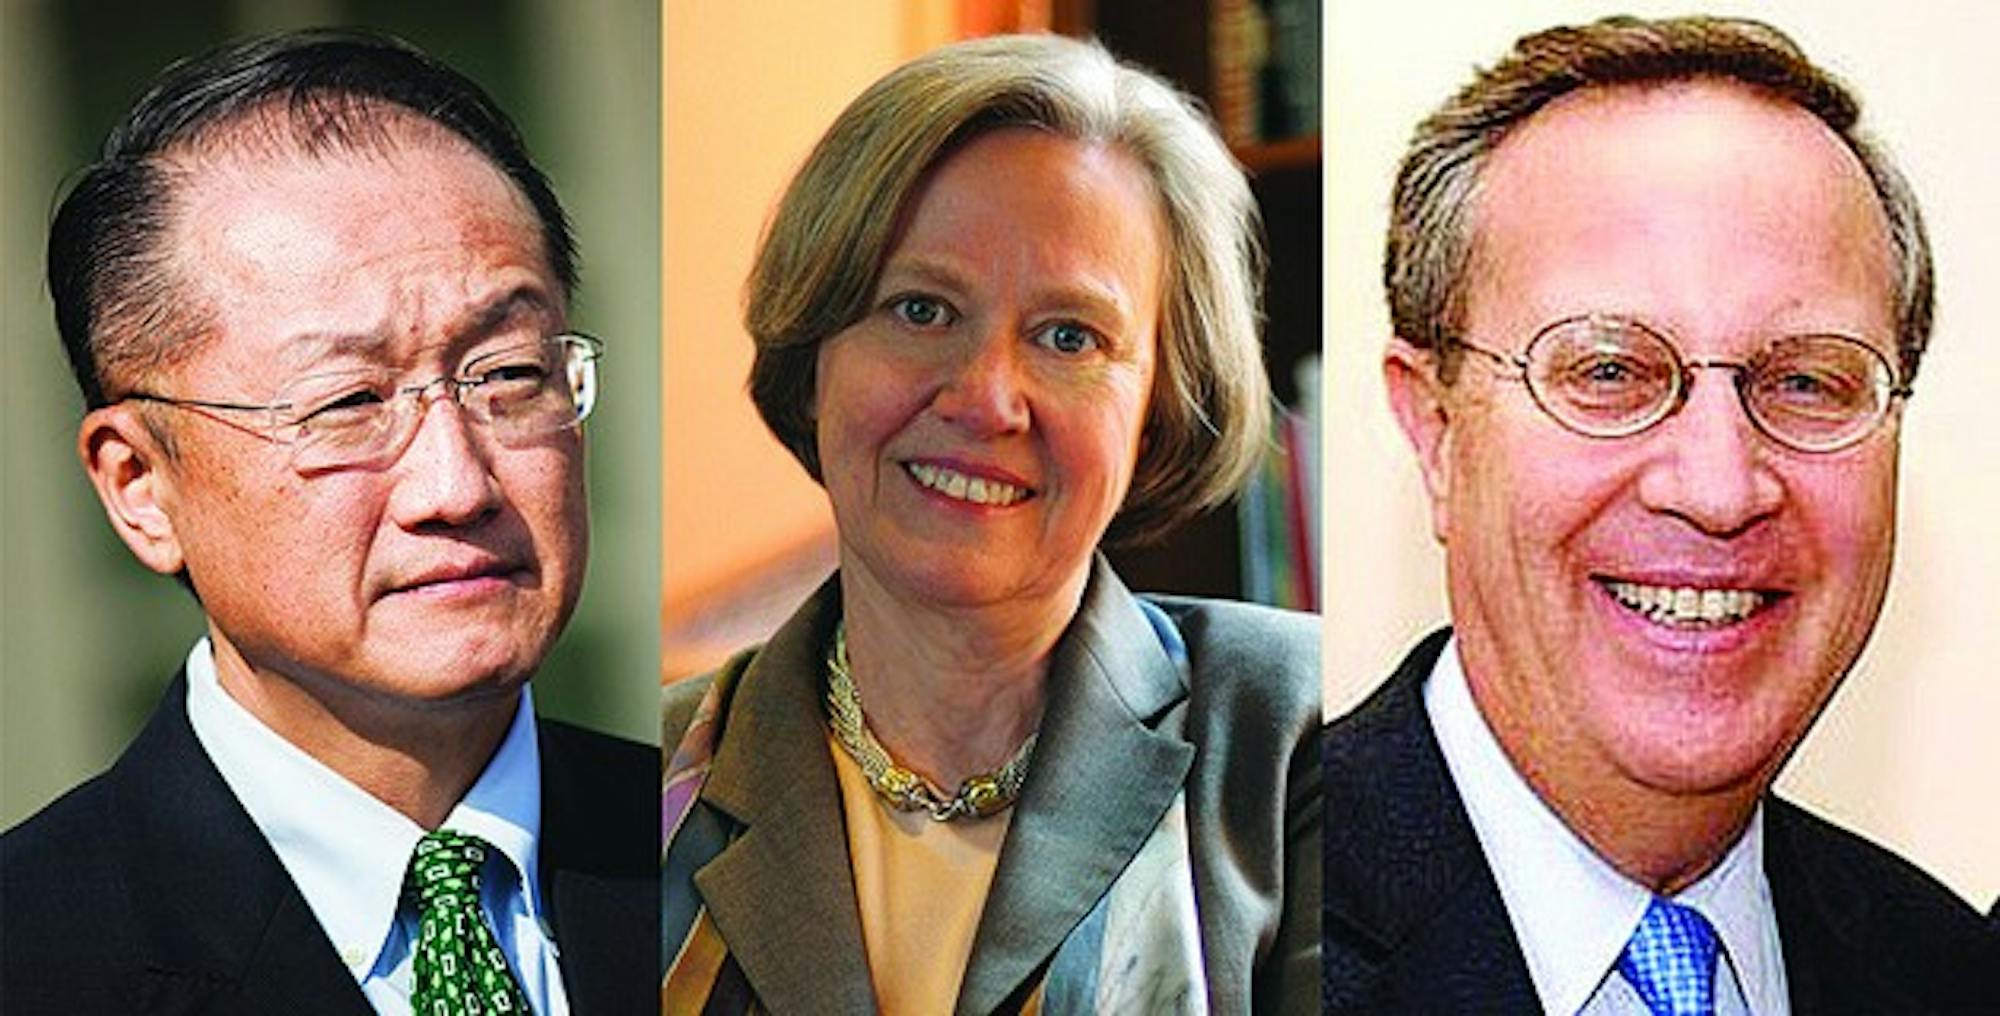 Jim Yong Kim, Princeton's Shirley Tilghman and Yale's Richard Levin will all have departed by the end of this year.